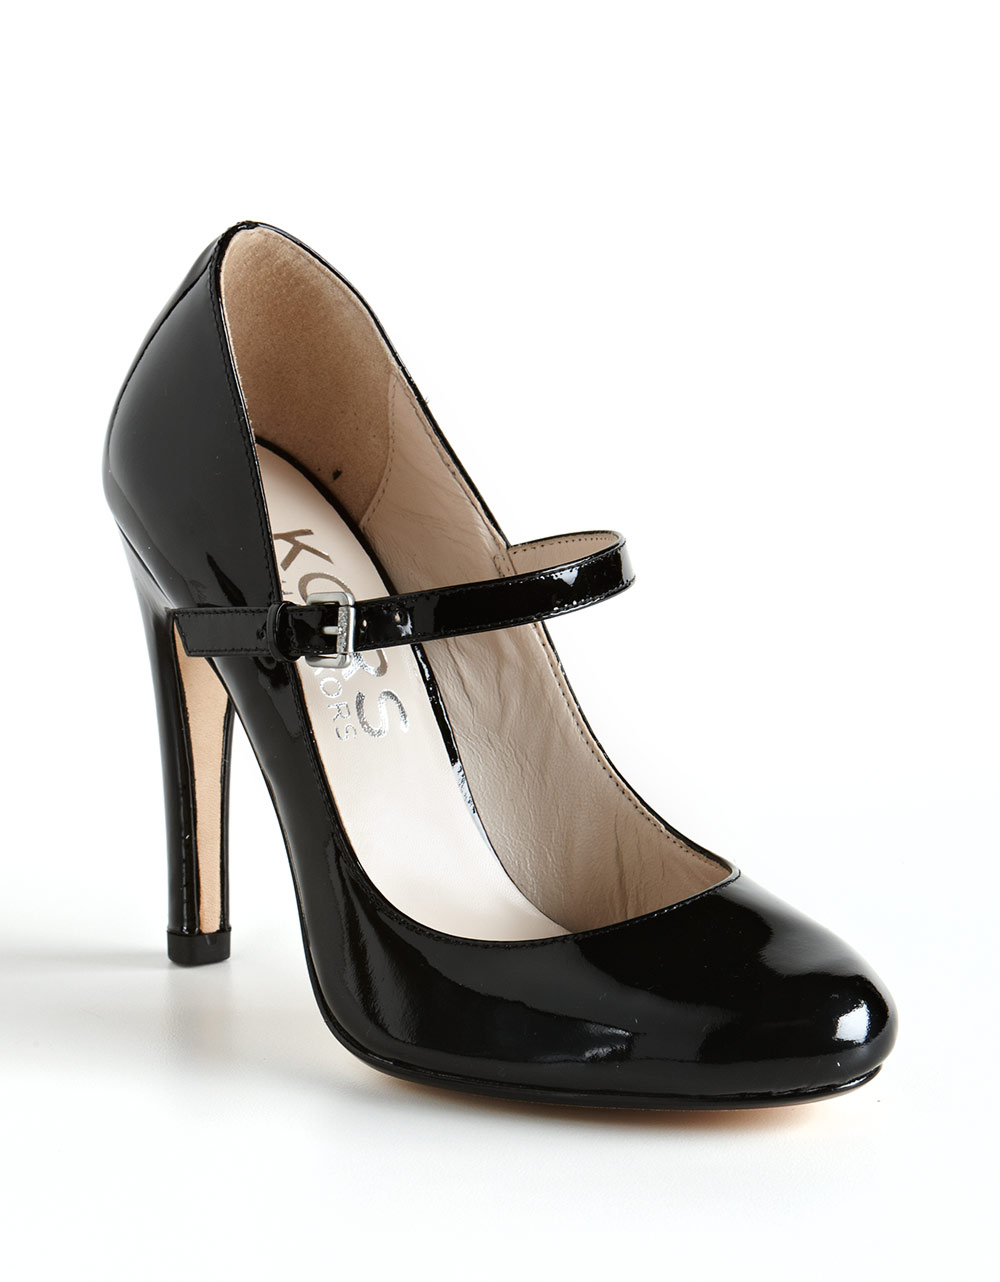 Lyst - Kors By Michael Kors Galli Leather Mary Jane Pumps in Black